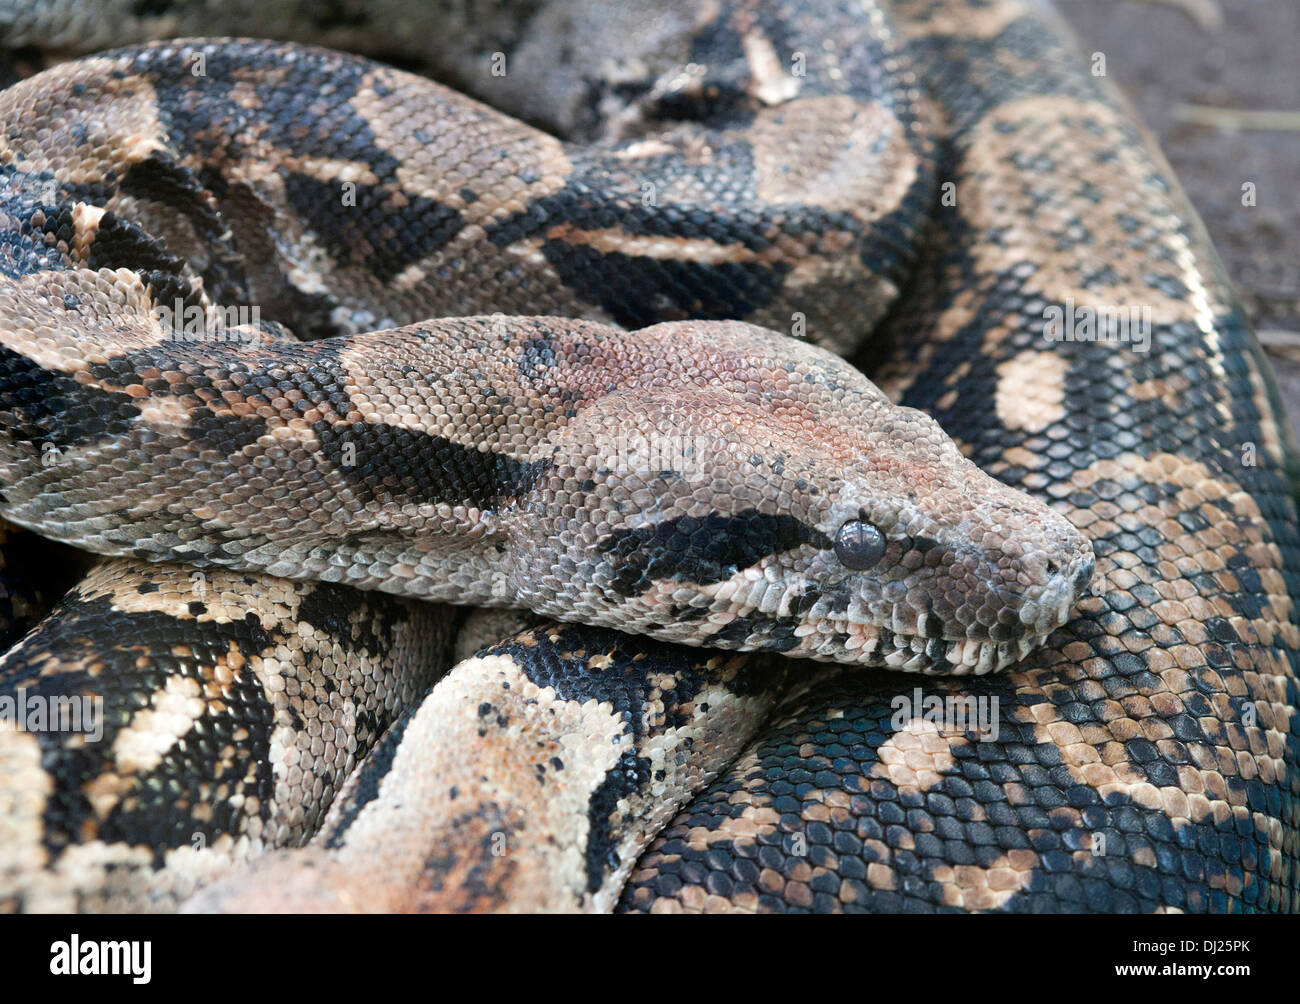 The Boa constrictor is a species of large, heavy-bodied snake. It is a member of the family Boidae. Stock Photo